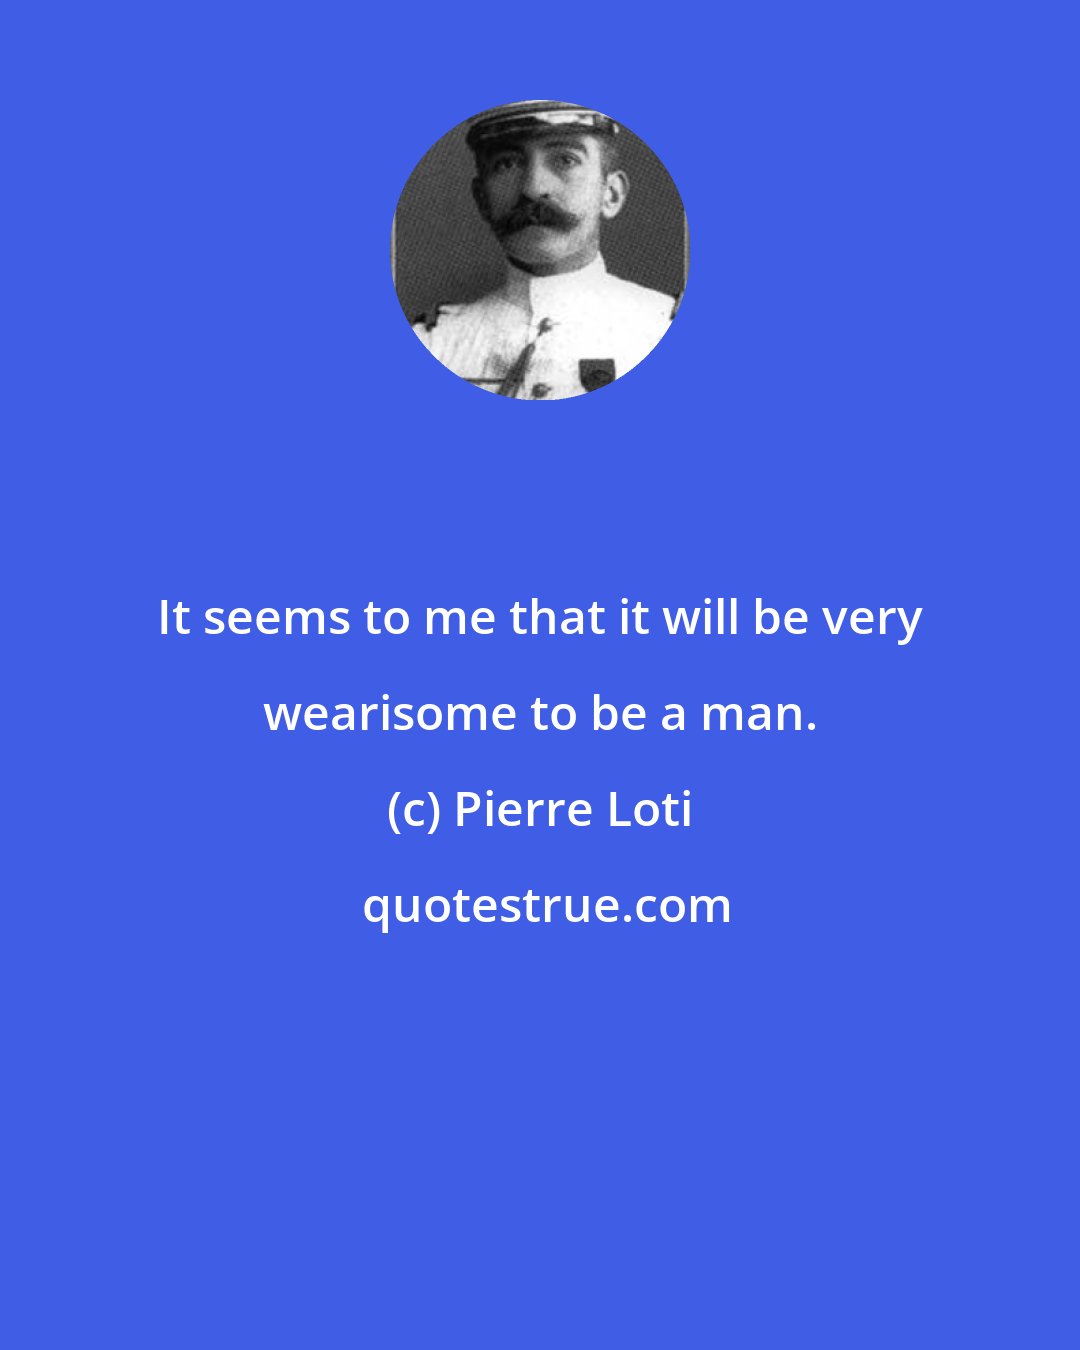 Pierre Loti: It seems to me that it will be very wearisome to be a man.